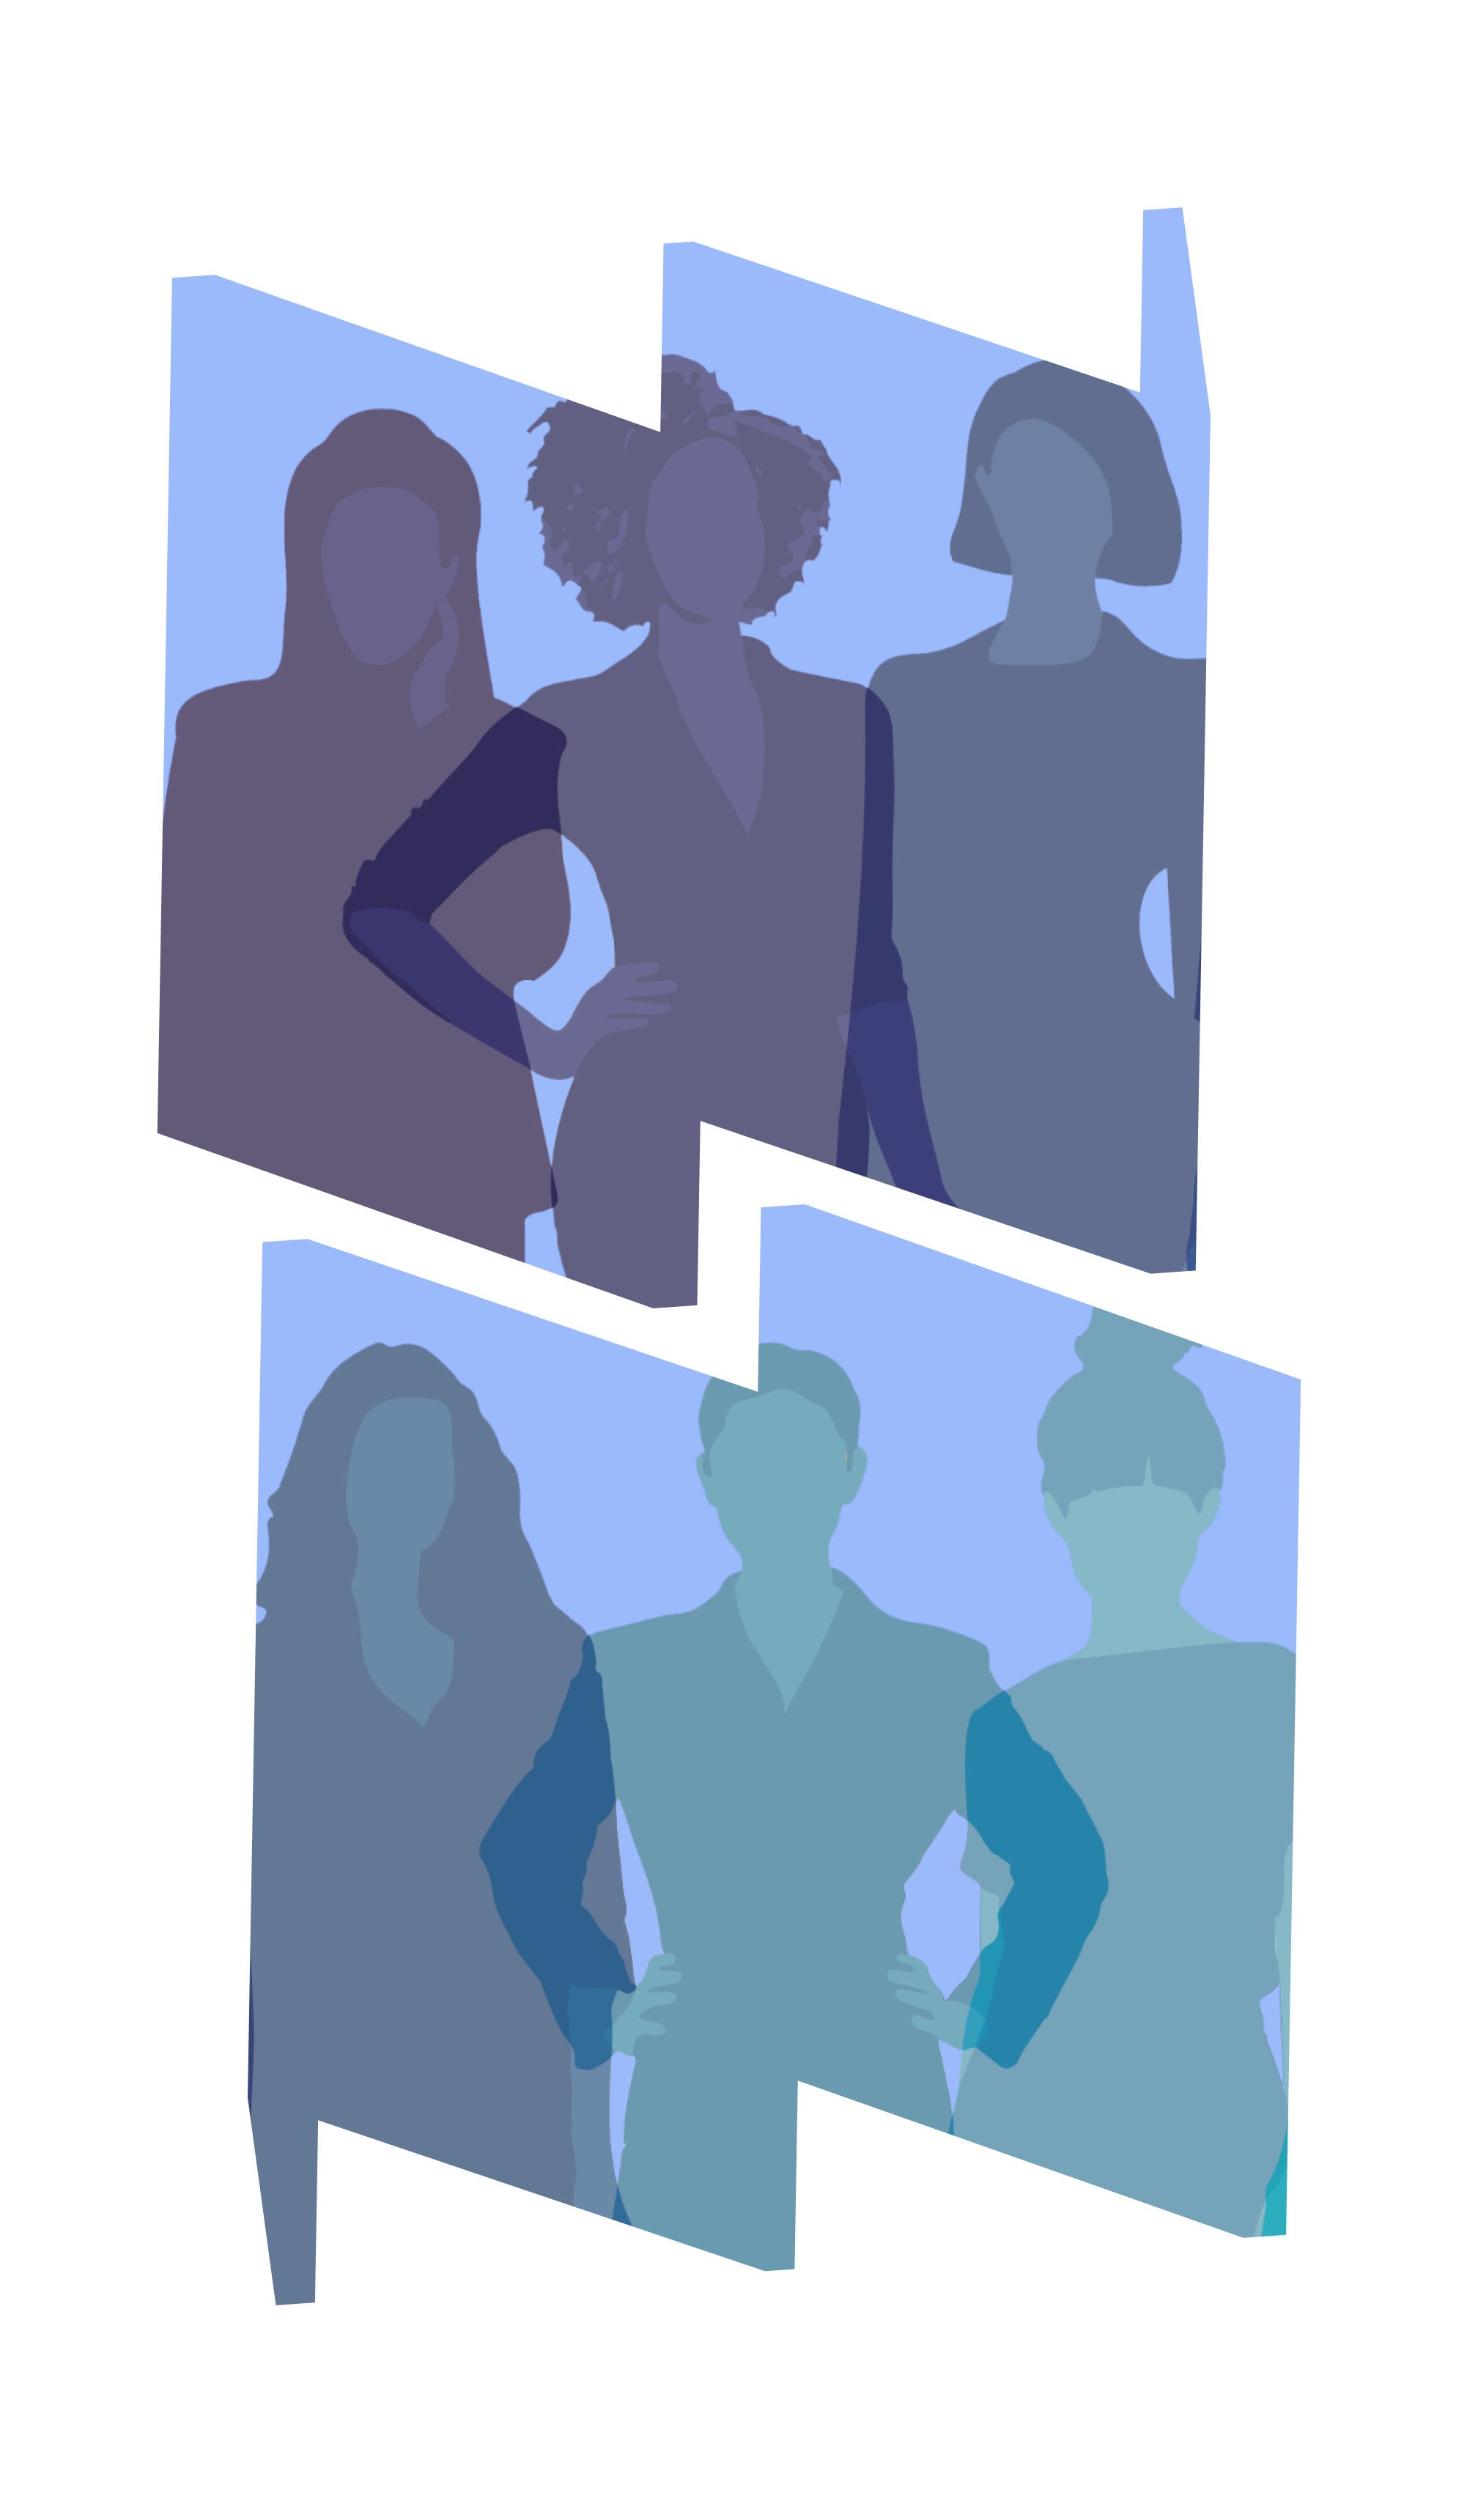 Illustration of several  women in colorful silhouettes against light blue backdrop inside frames of W (top) and M (bottom).